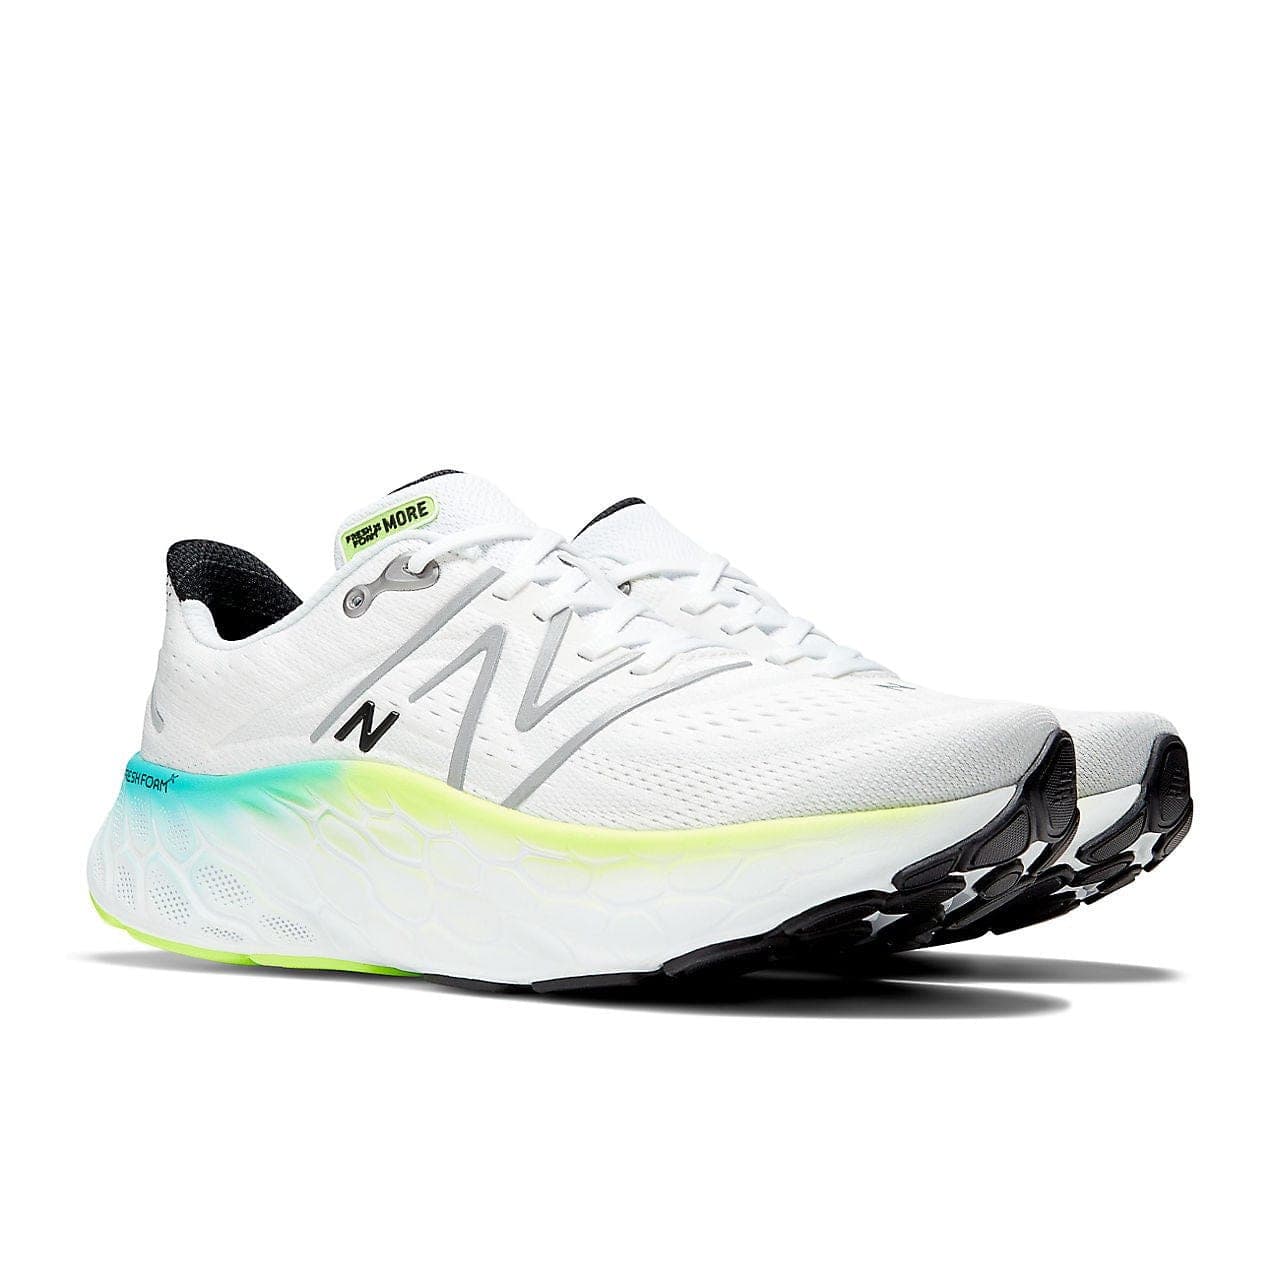 New Balance Fresh Foam More v4 (Mens) - White with Electric Teal